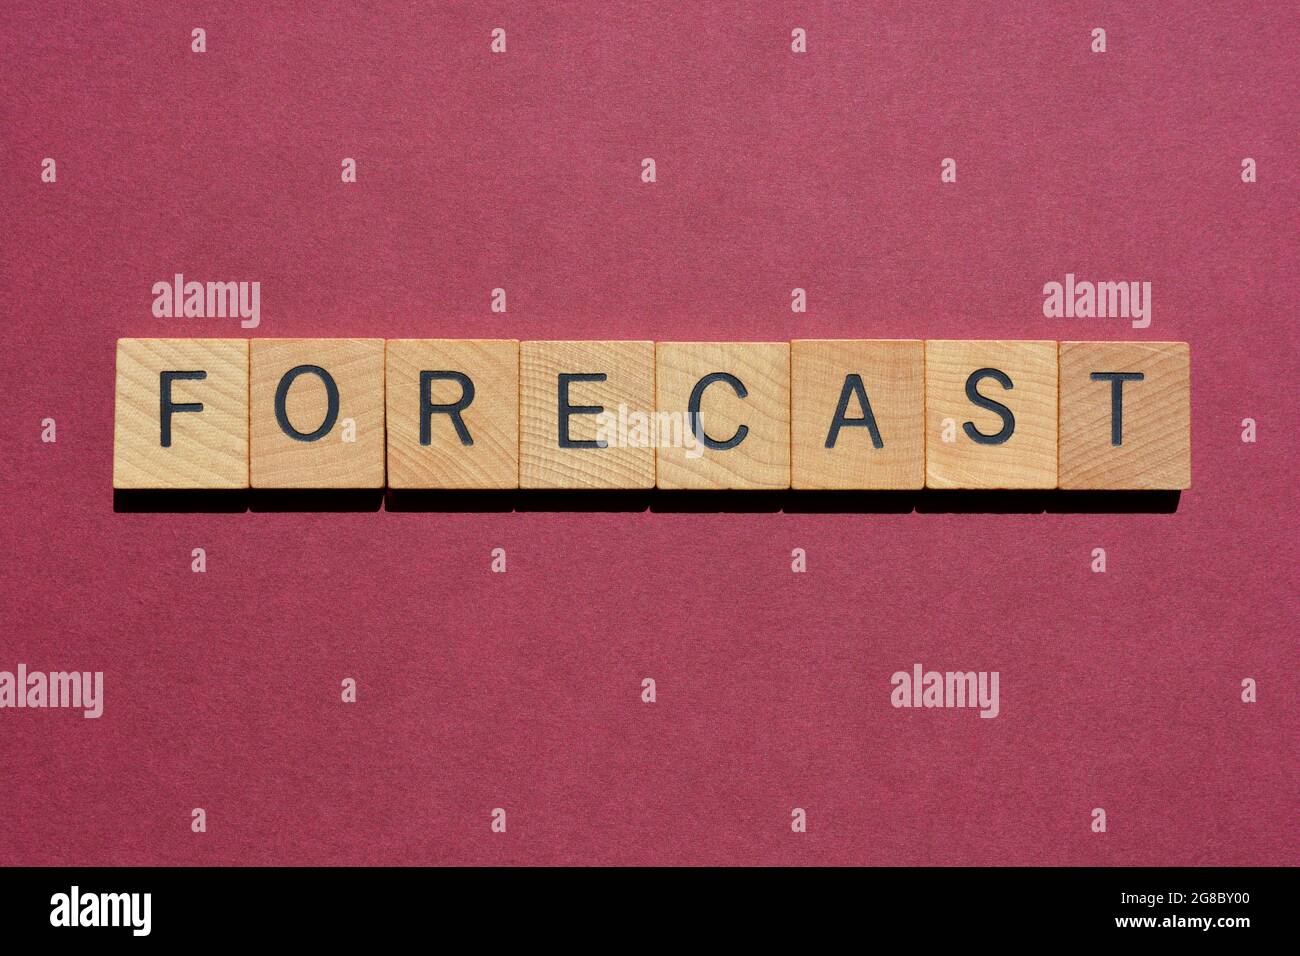 Forecast, word in wooden alphabet letters isolated as banner headline Stock Photo